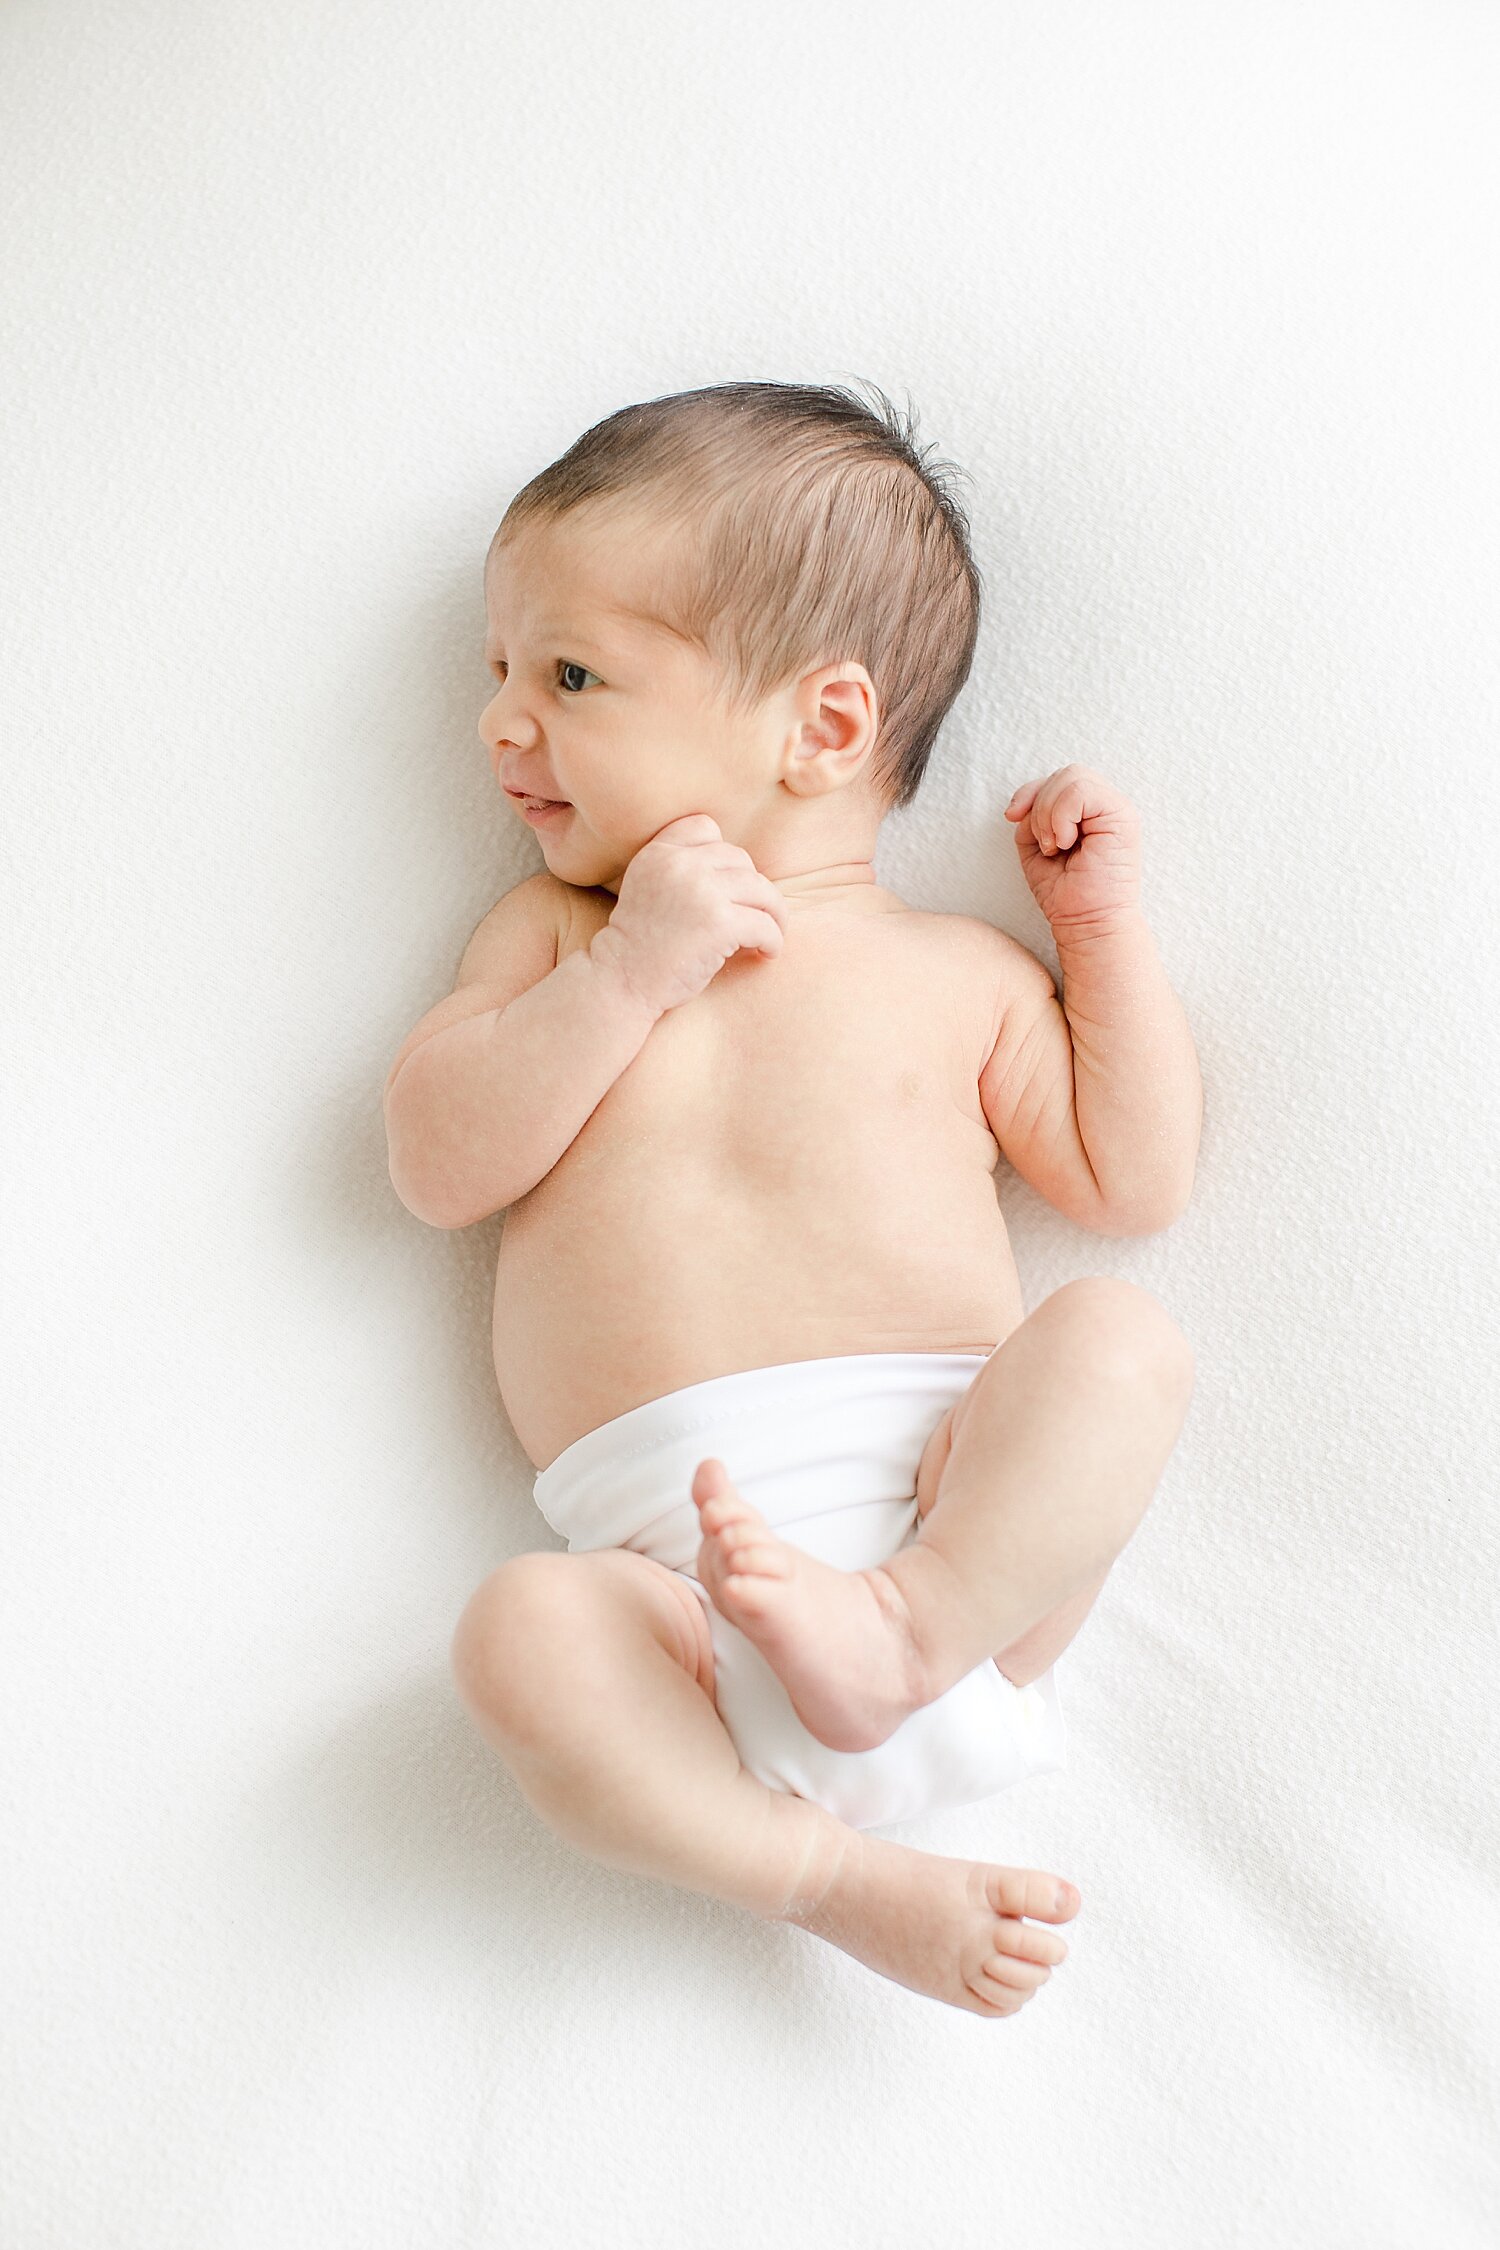 Newborn session for baby boy in studio with CT Newborn Photographer, Kristin Wood Photography.